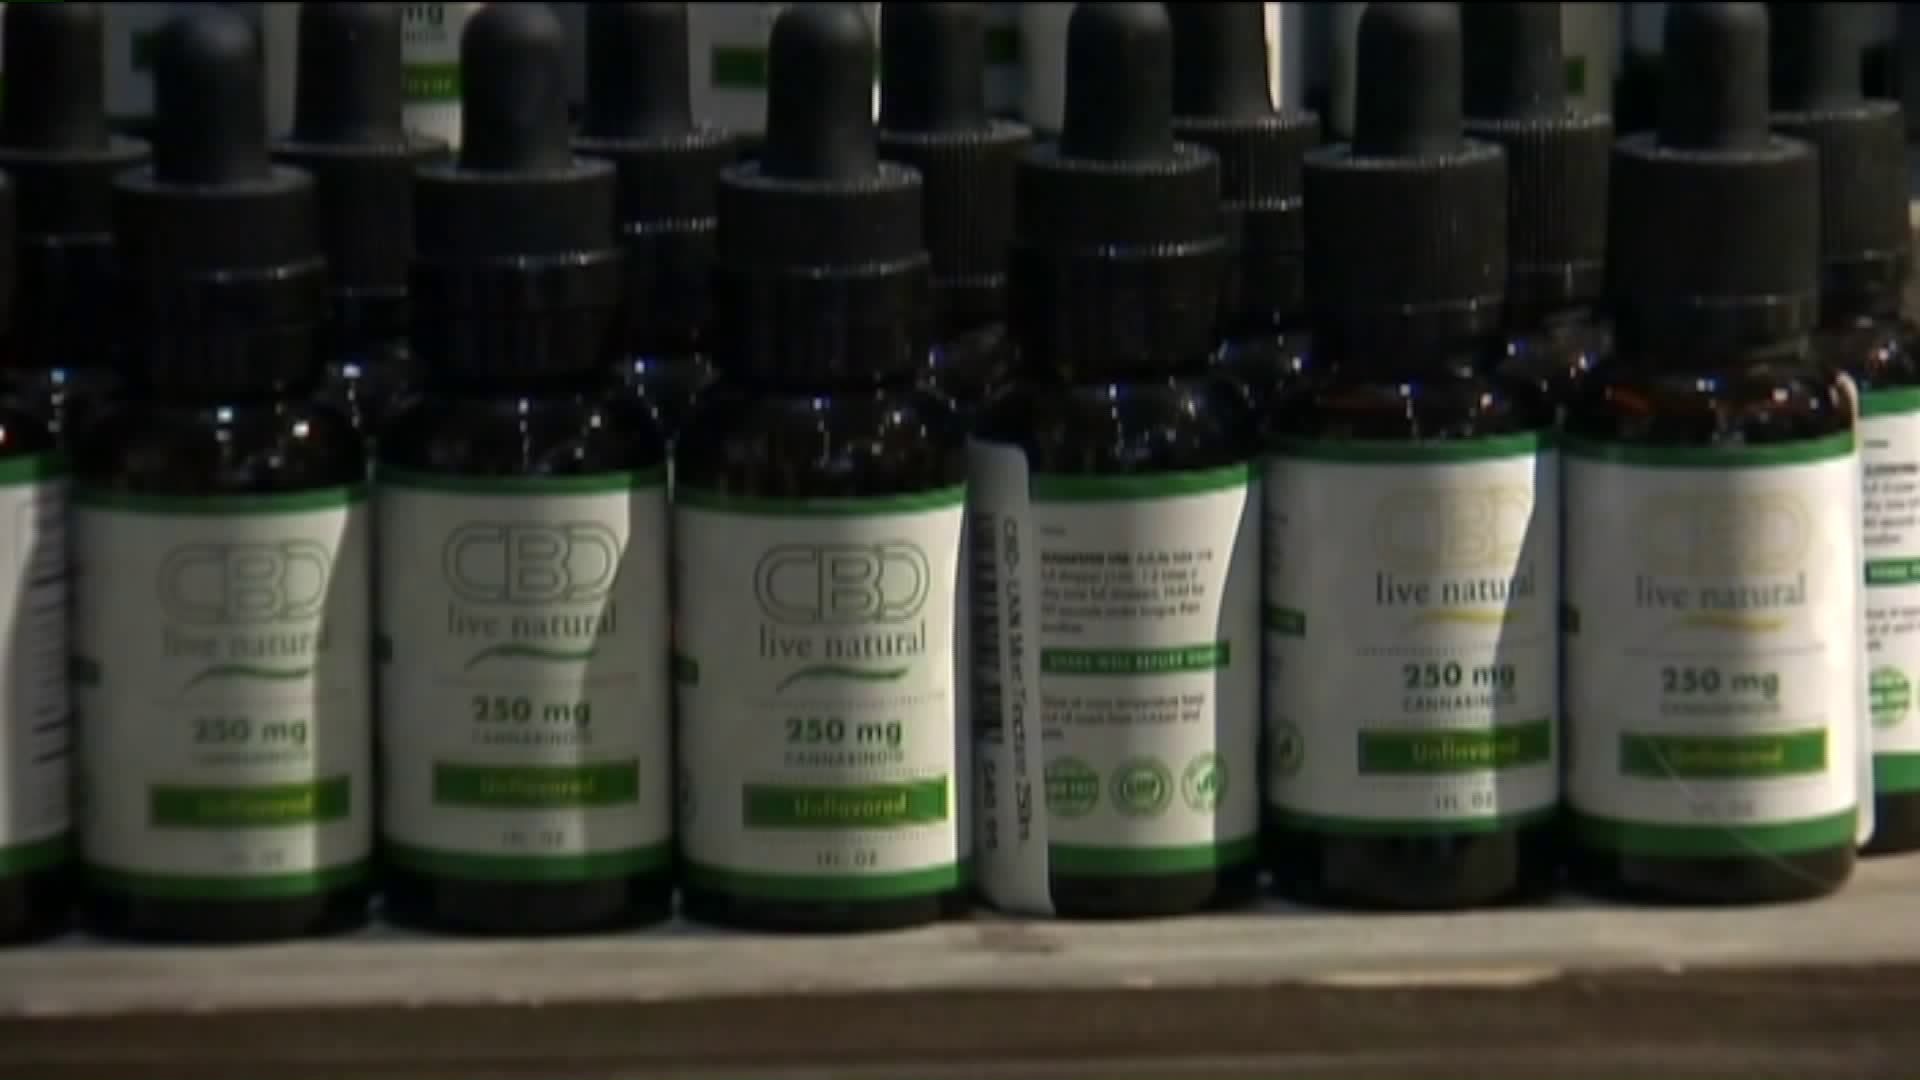 CBD oil helps Connecticut man stop taking over-the-counter medications